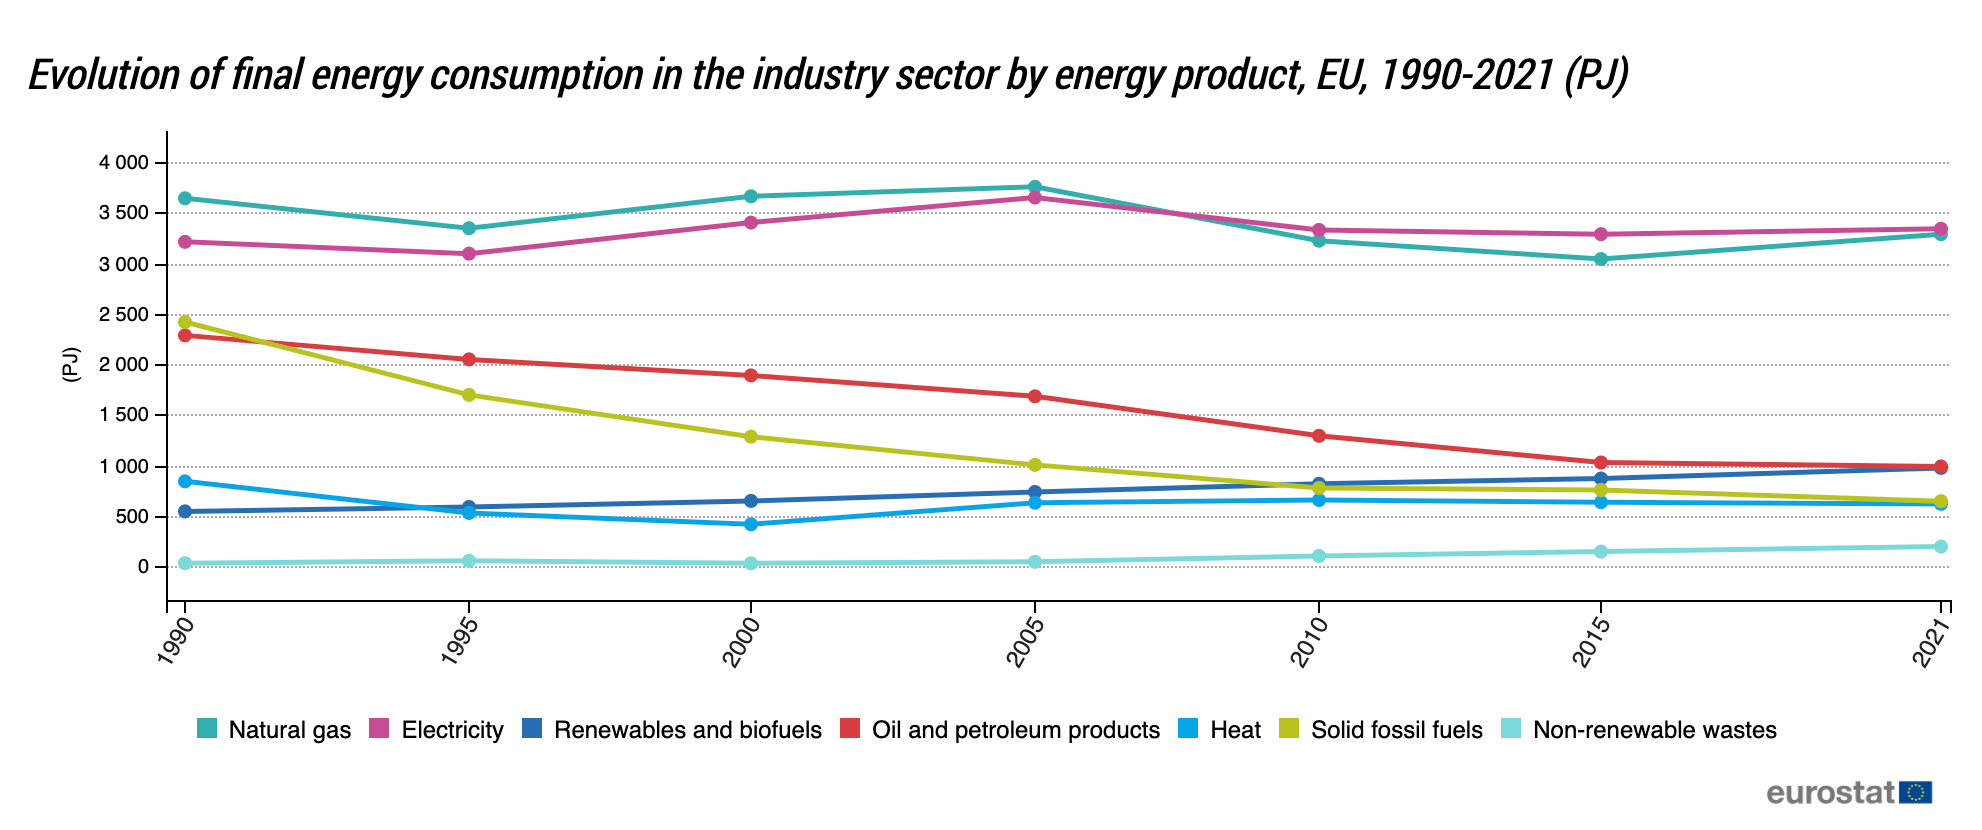 Energy consumption in the industry sector